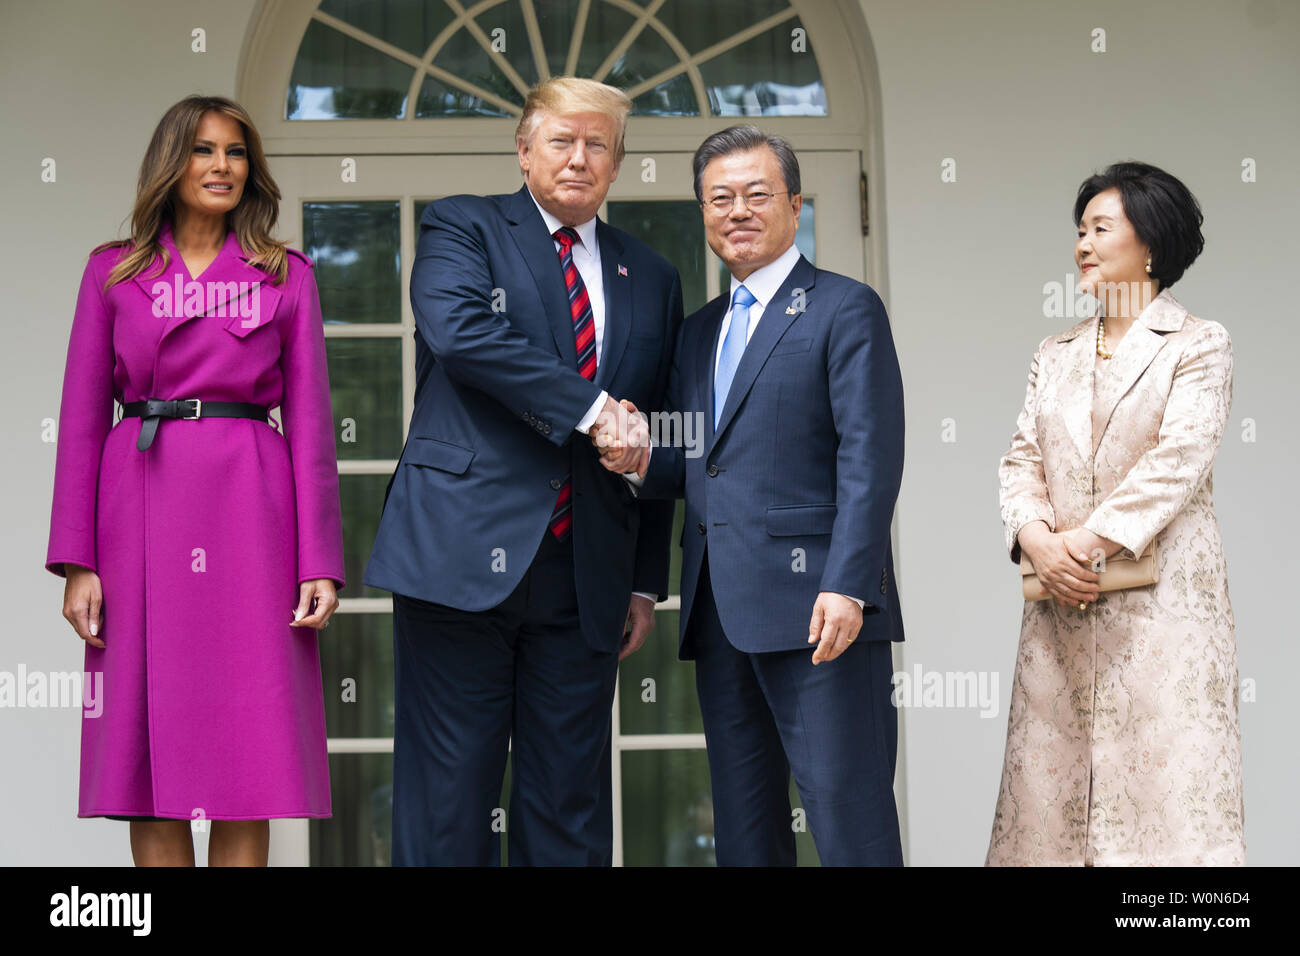 US President Donald J. Trump (C-L) and First Lady Melania Trump (L) welcome Korean President Moon Jae-in (C-R) and Mrs. Kim Jung-sook (R) to the Colonnade of the White House in Washington on April 11, 2019. President Moon is expected to ask President Trump to reduce sanctions on North Korea in an attempt to jump start nuclear negotiations between North Korea and the US.  Photo by Jim Lo Scalzo/UPI Stock Photo